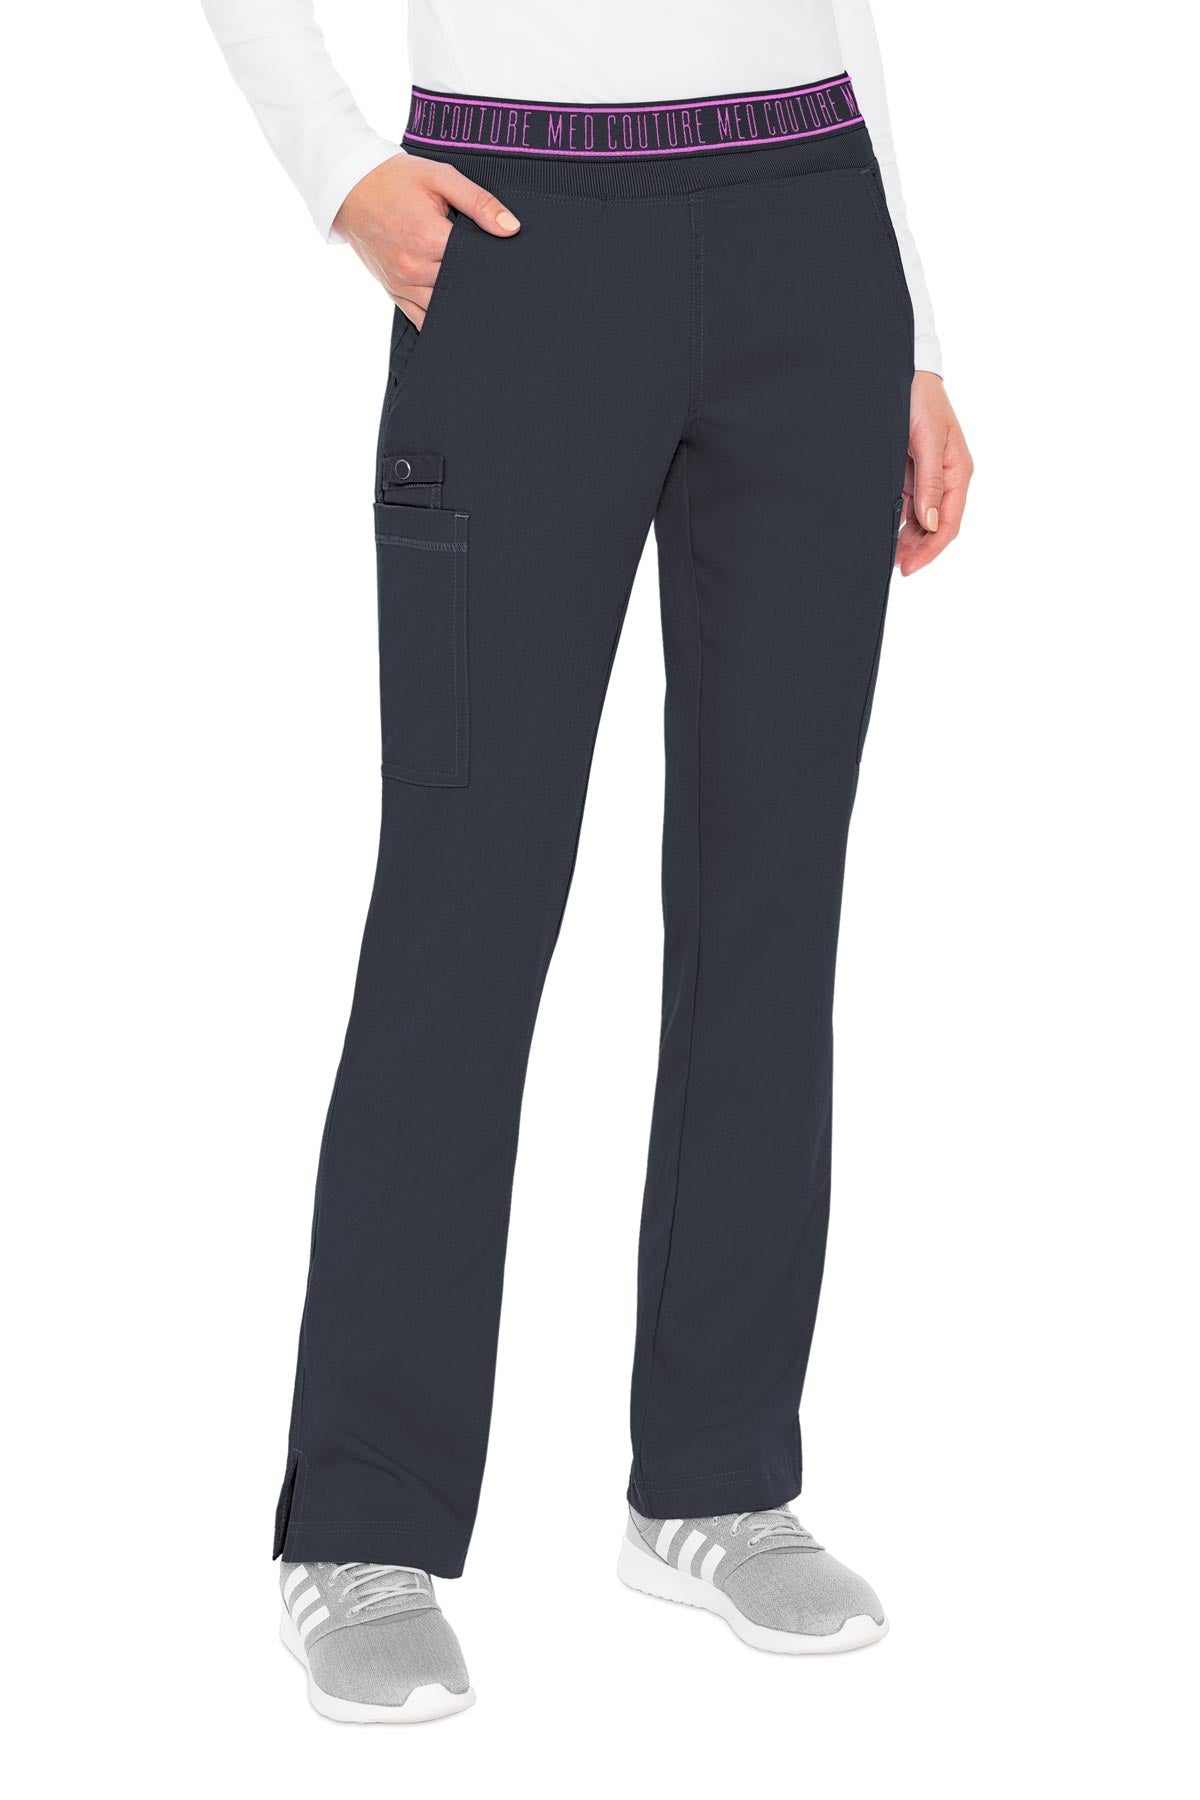 Med Couture Touch Women's Yoga Scrub Pants-MC7725